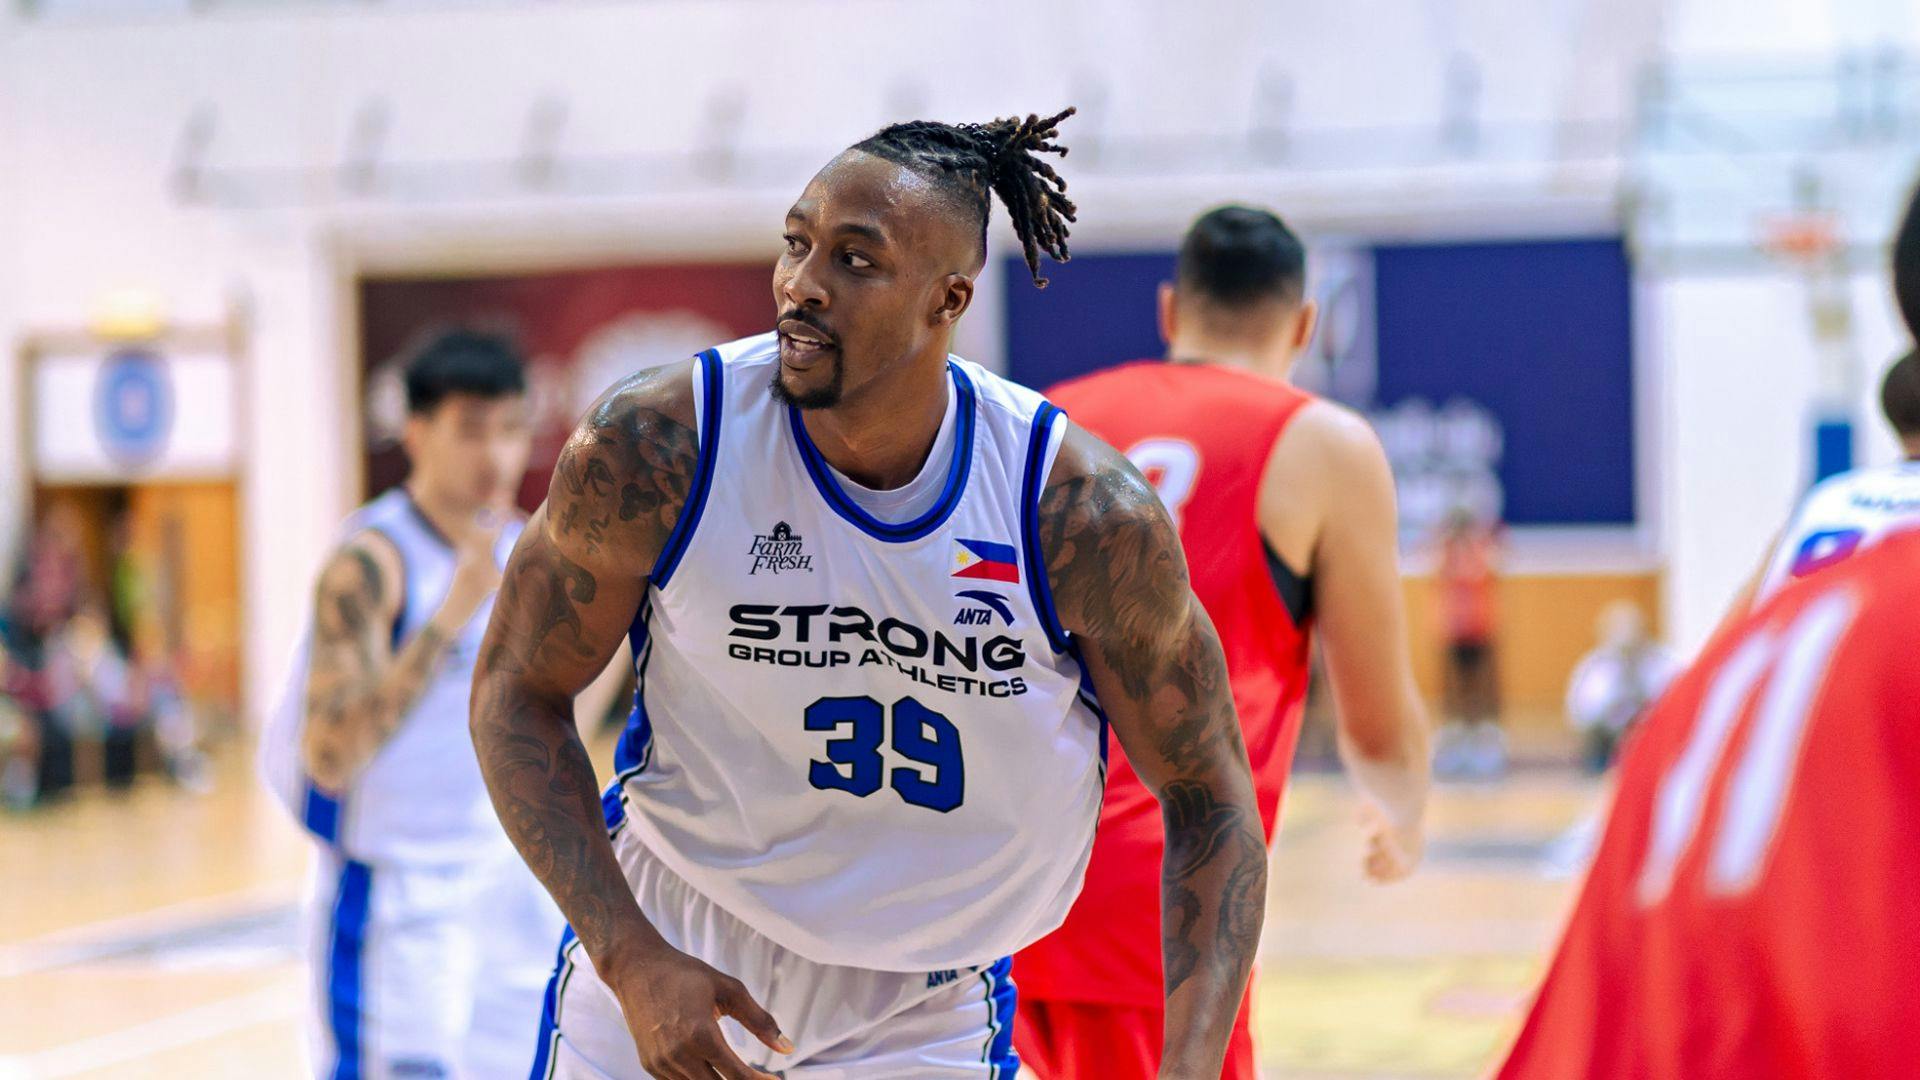 PH represent: Dwight Howard sums up Strong Group experience after heartbreaking final loss in Dubai